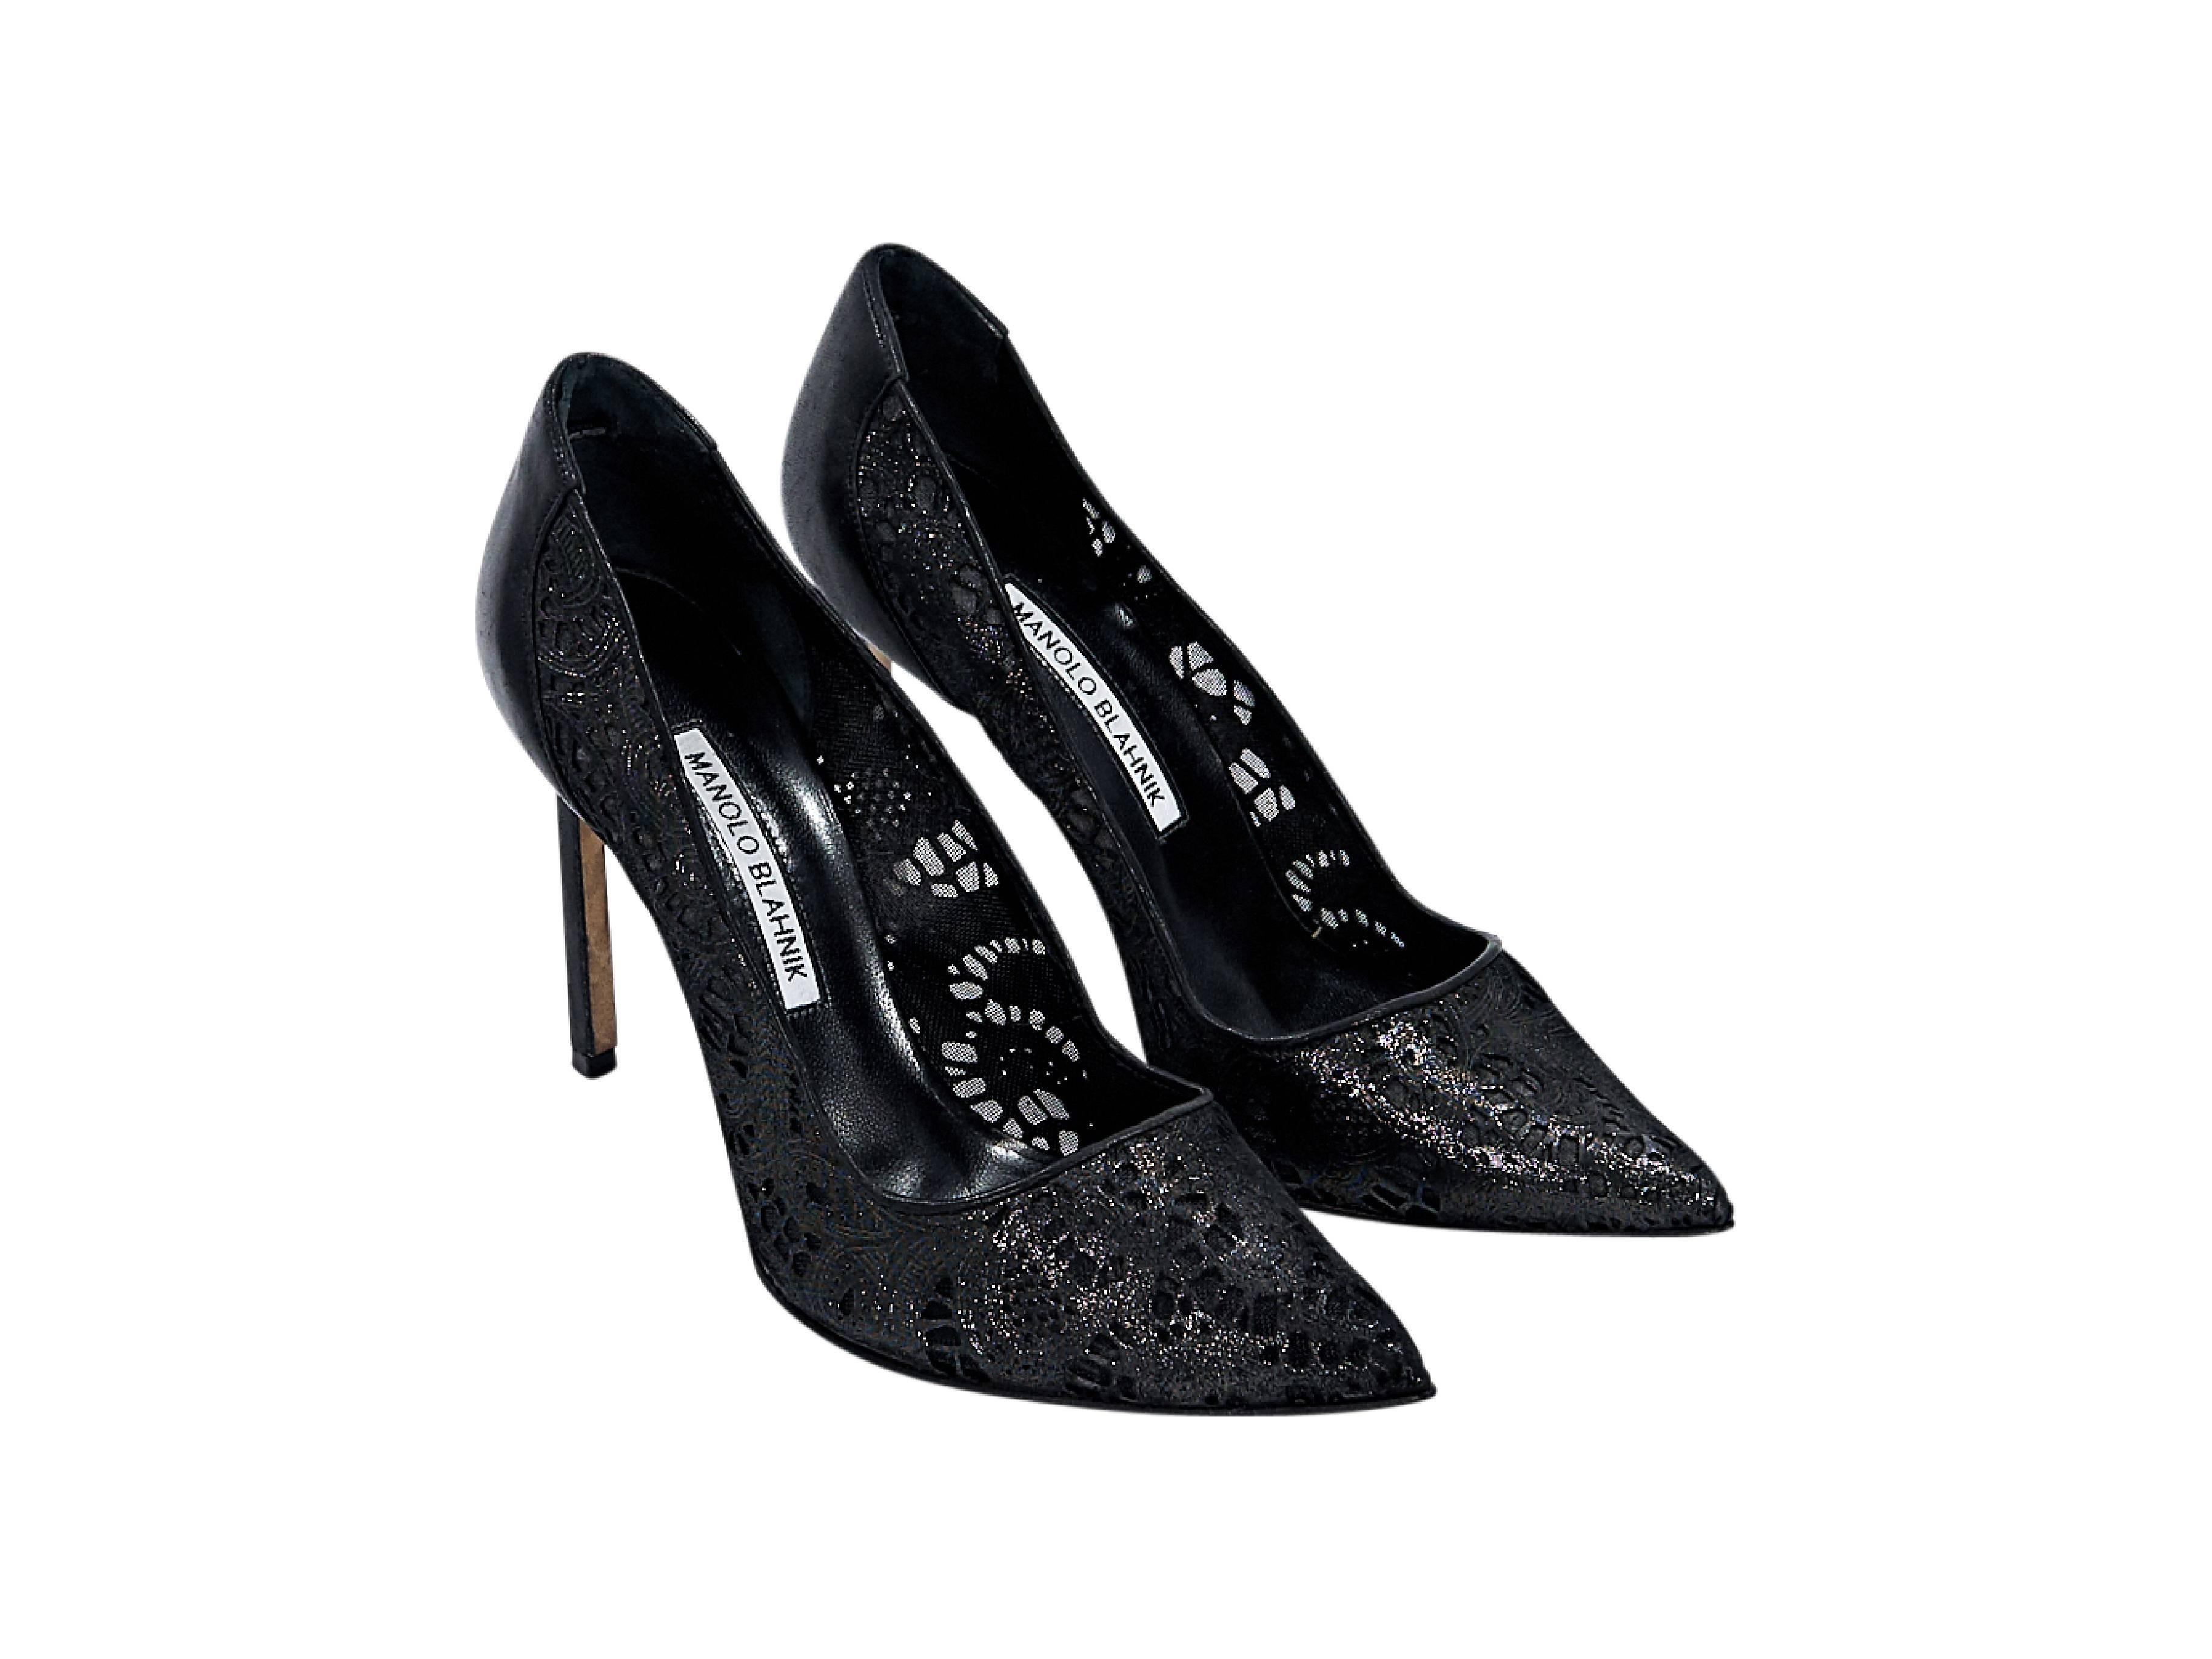 Product details:  Black leather and lace pumps by Manolo Blahnik.  Point toe.  Slip-on style. Size 8 
Condition: Pre-owned. Very good.

Est. Retail $ 795.00